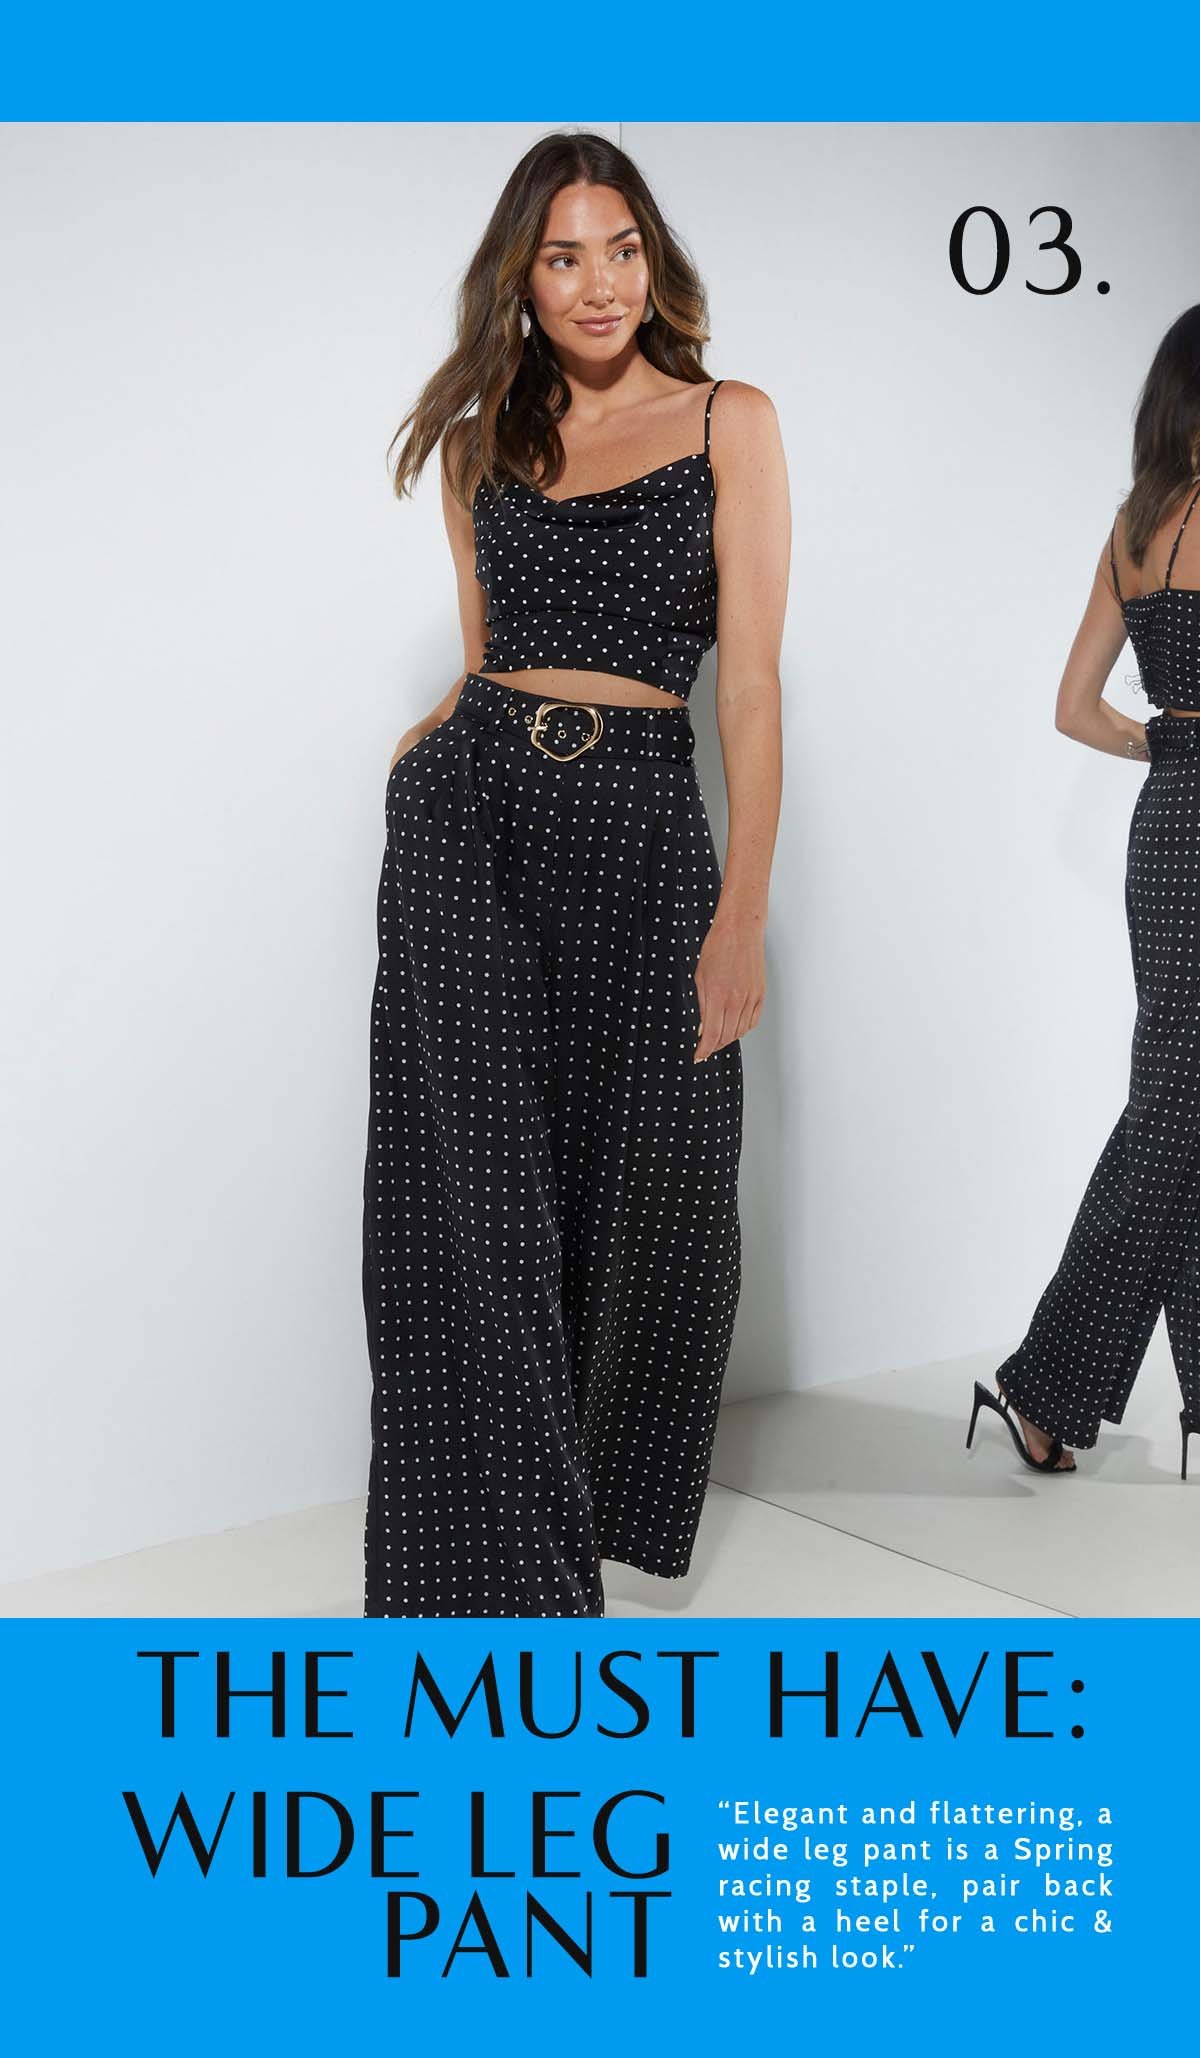 3. The Must-Have: Wide Leg Pant. “Elegant and flattering, a wide leg pant is a Spring racing staple, pair back with a heel for a chic & stylish look.”